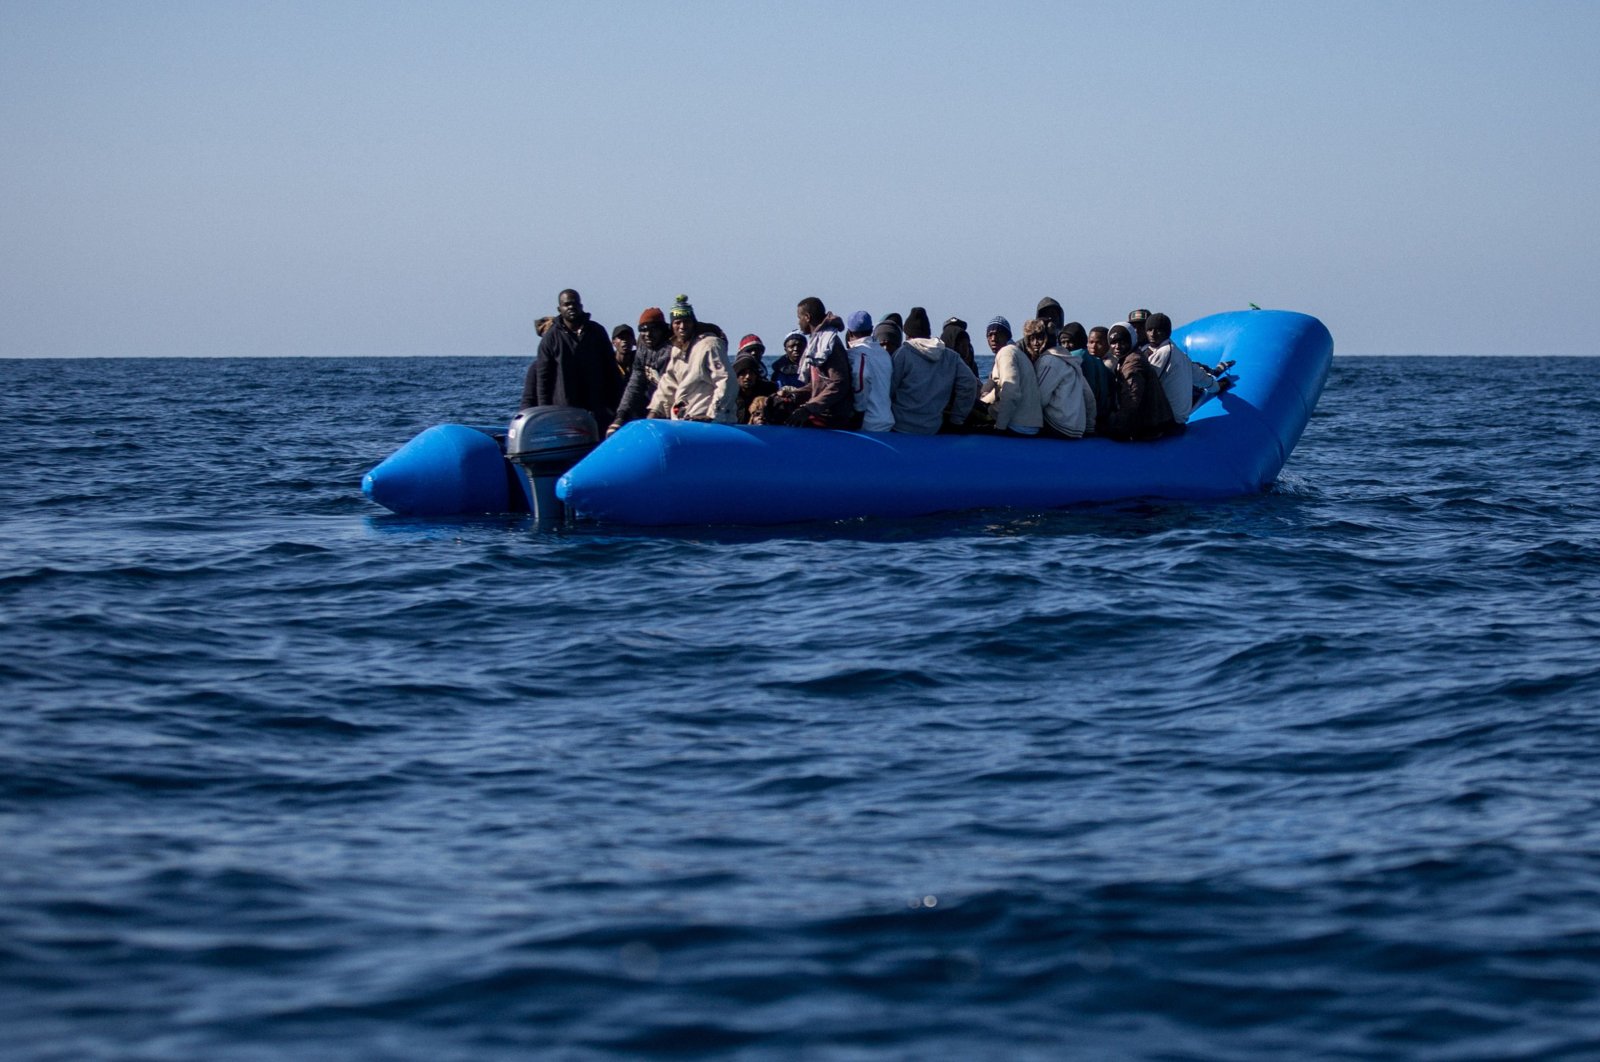 An inflatable boat with 47 migrants on board off Libya's coast, the Mediterranean Sea, January 19, 2019. (AFP Photo)